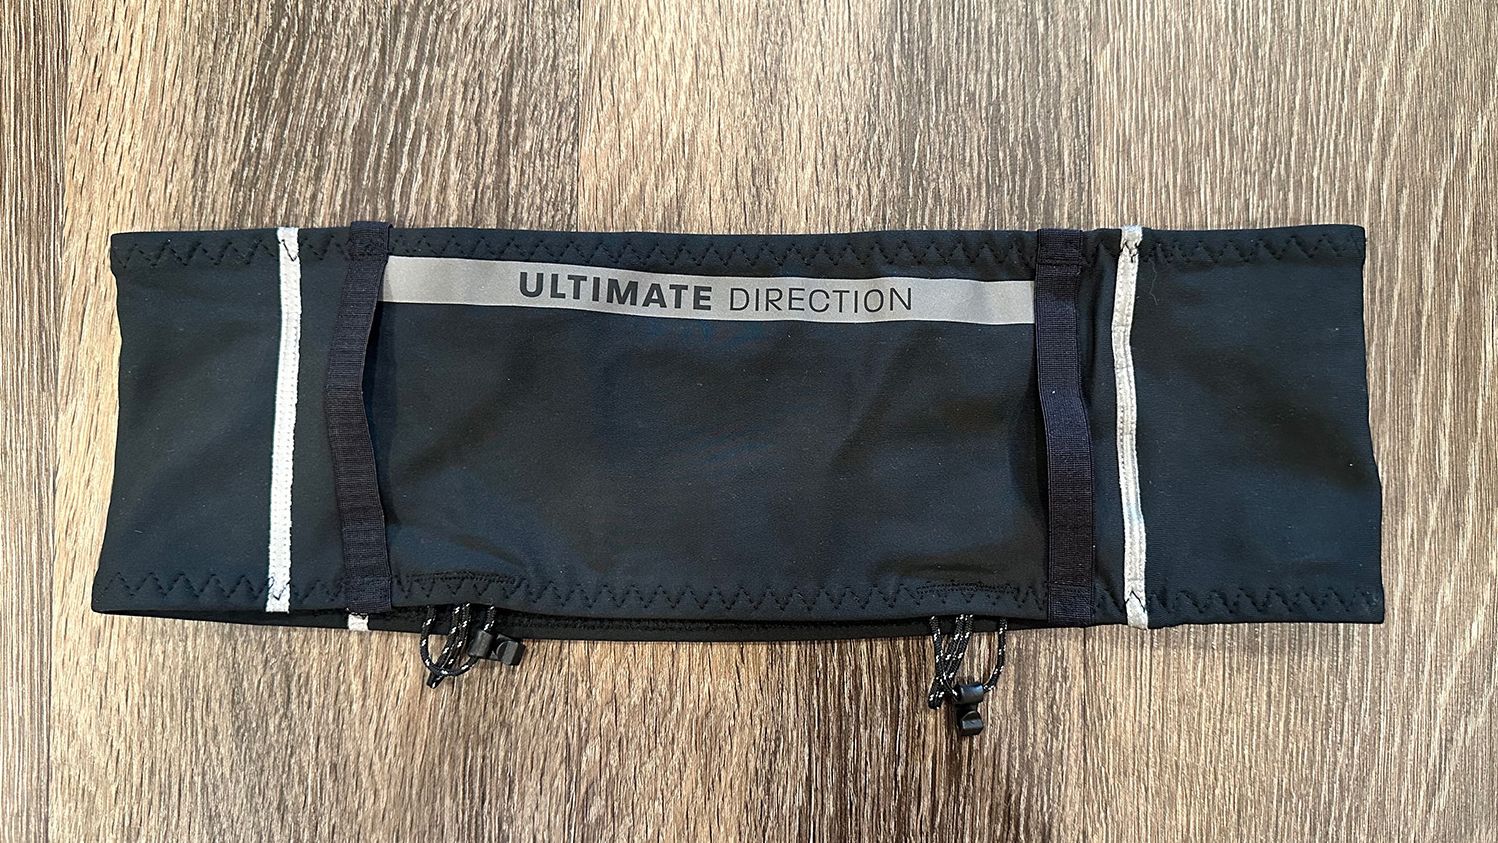 Ultimate Performance Running Belt Review